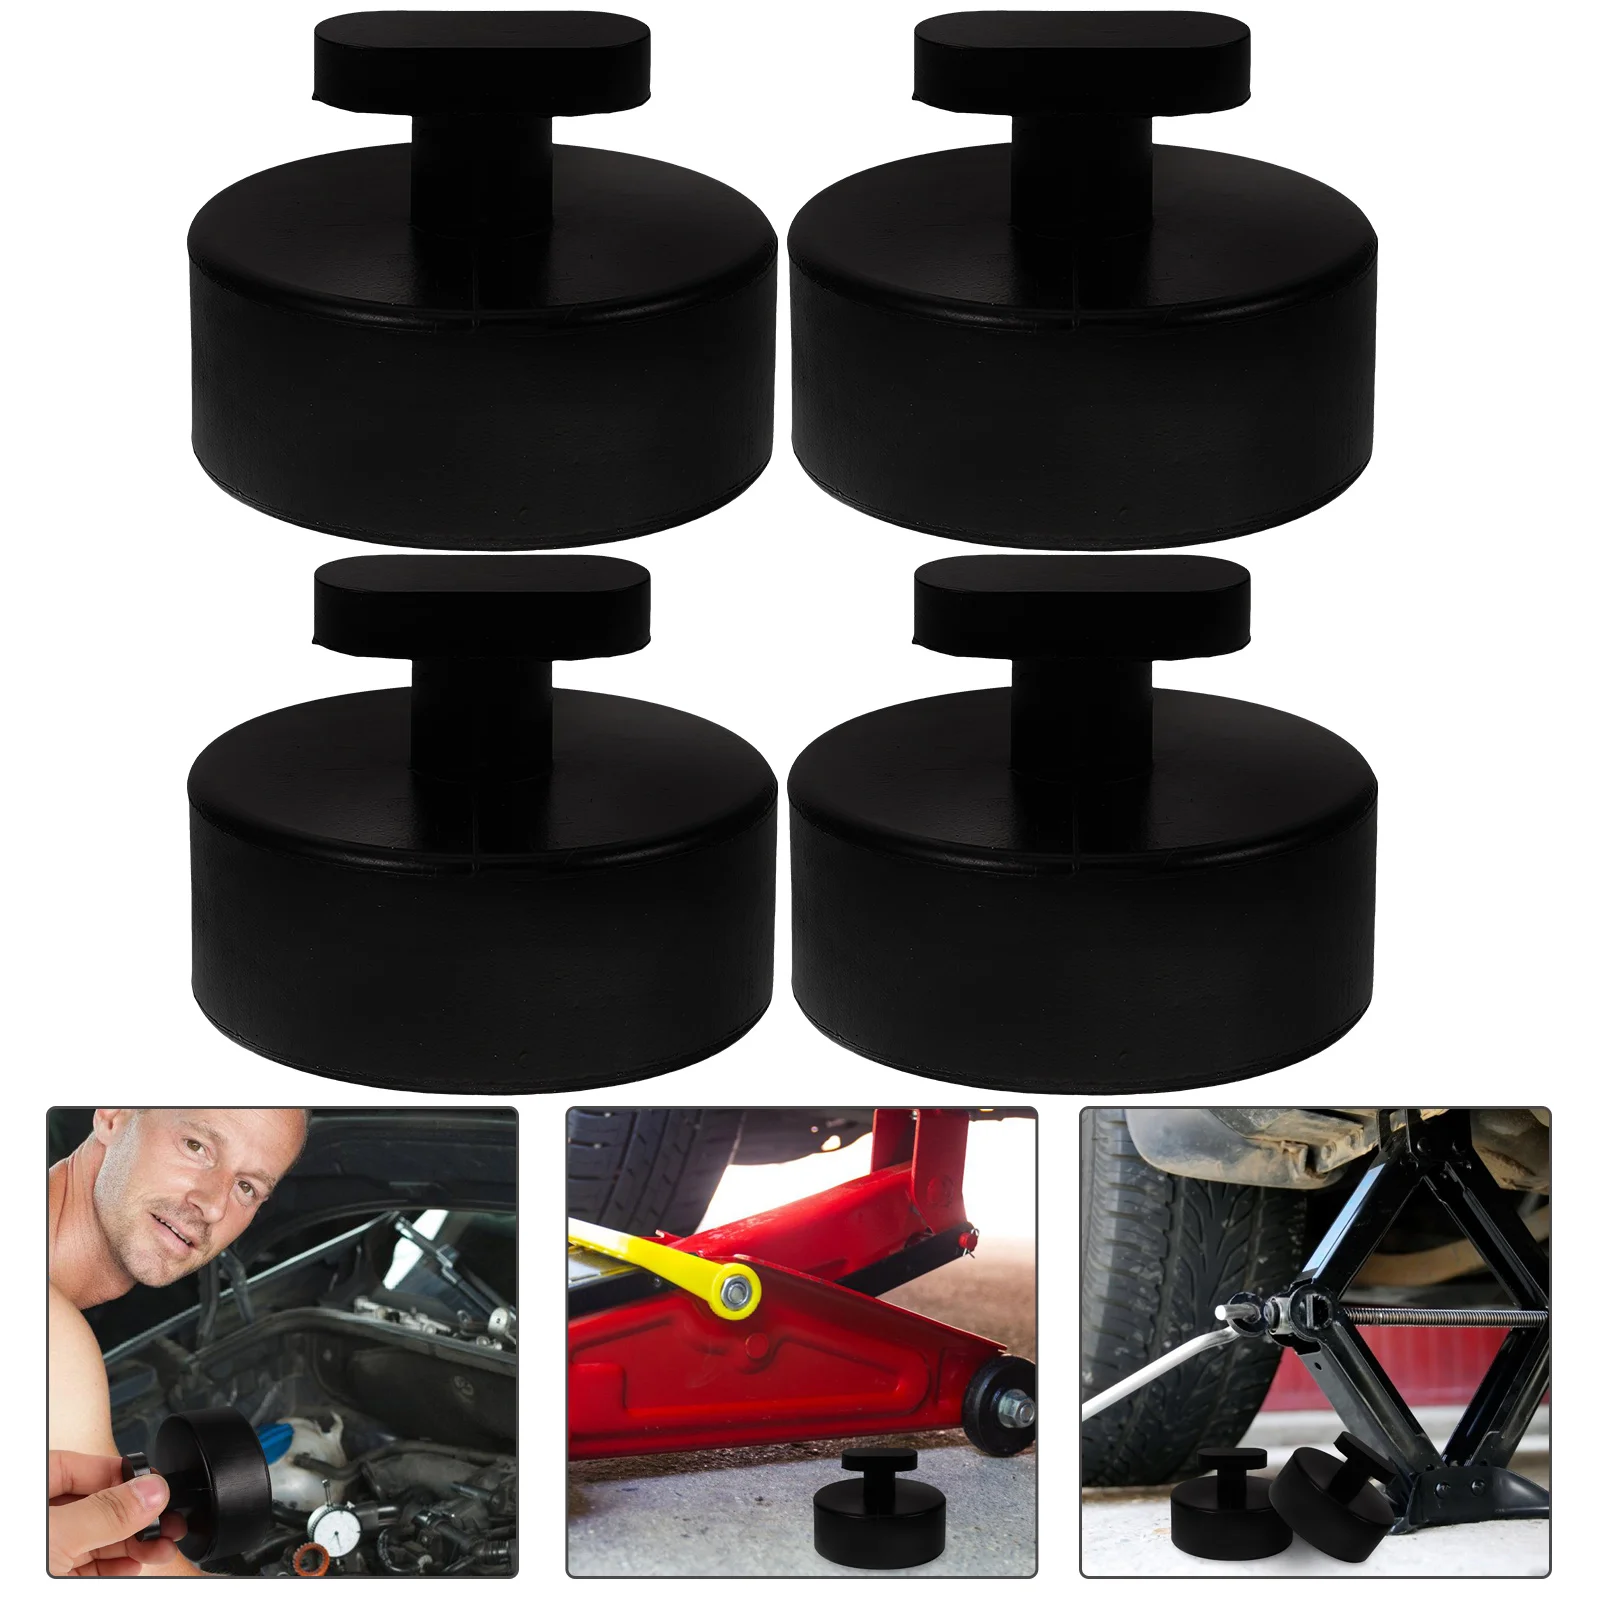 4 Pcs Car Chassis Jack Rubber Pad Support 4pcs Floor Pads Bracket for Stand Rv Pinch Welds Black Mat